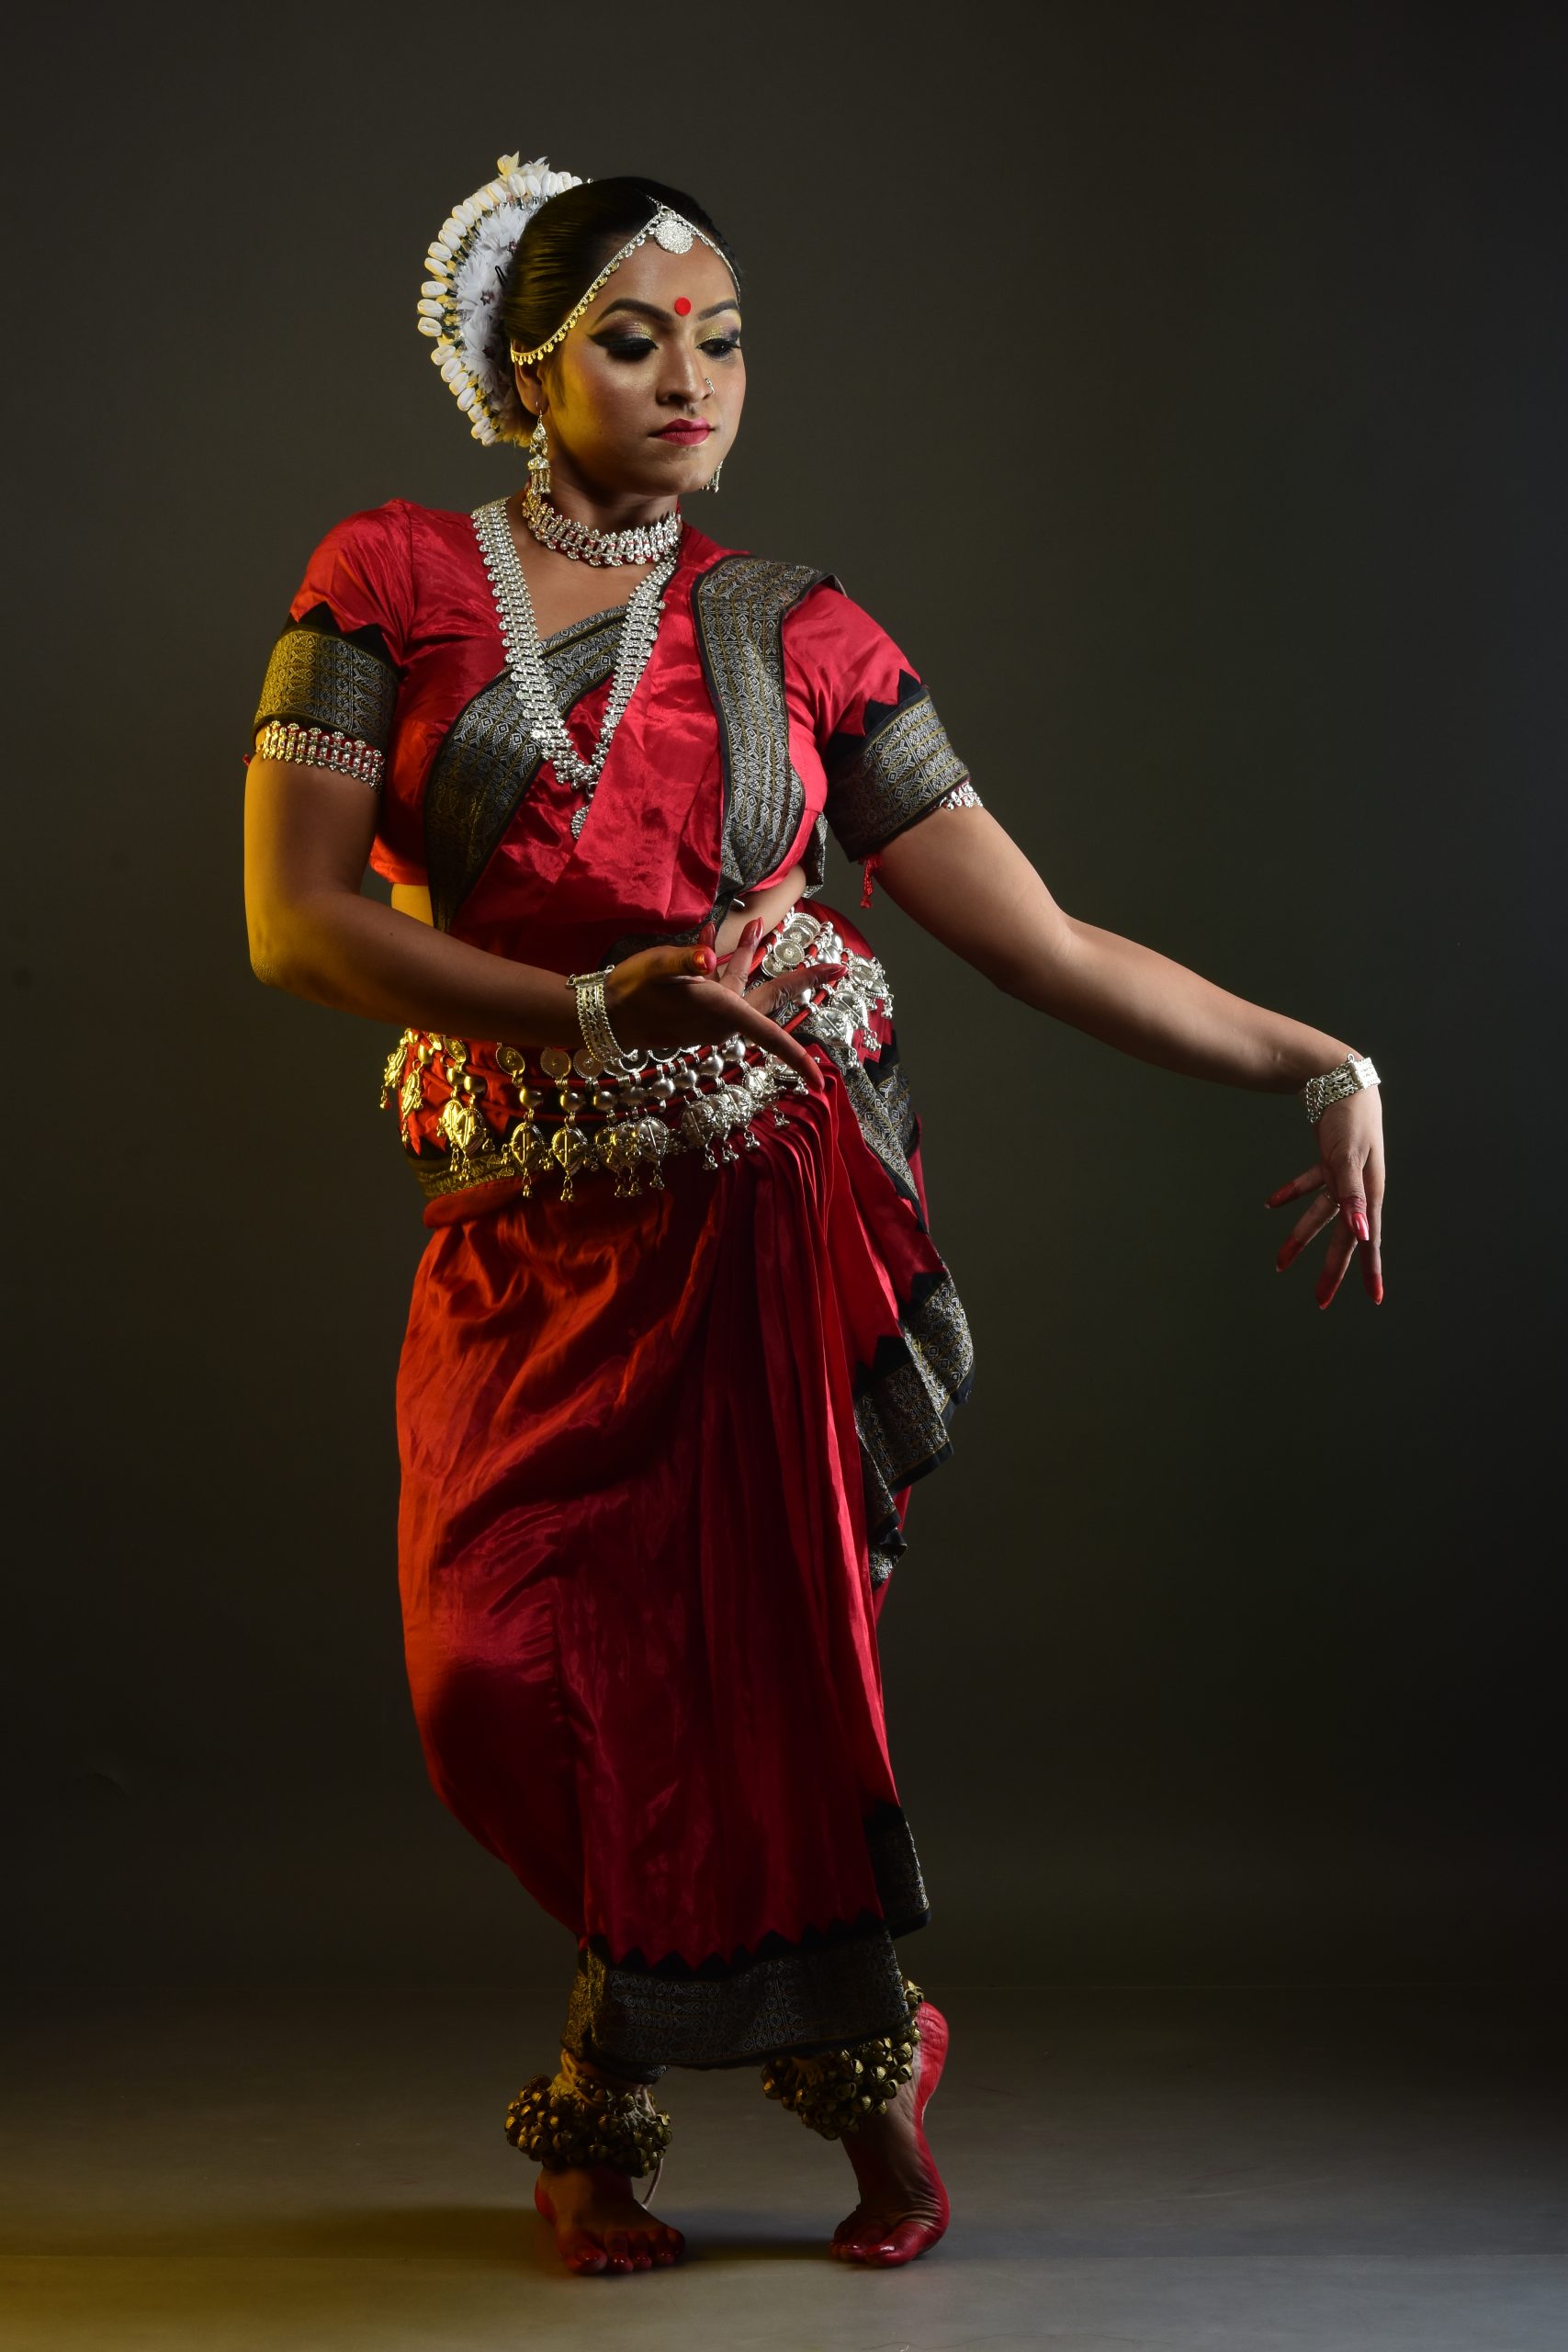 Dancer with expressions